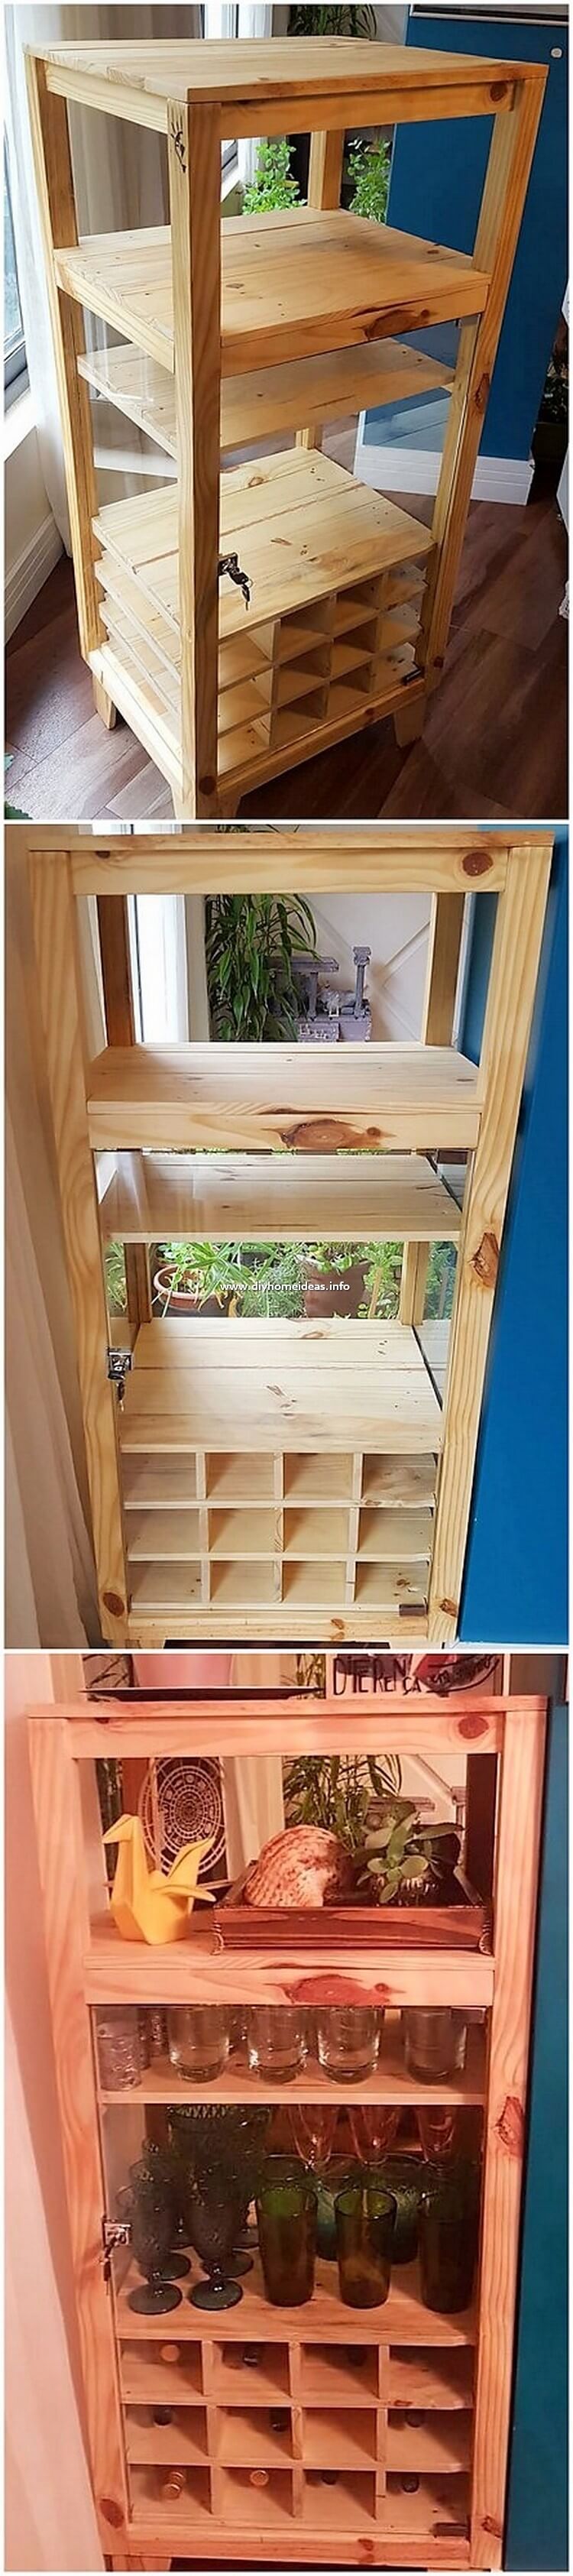 Wooden Pallet Shelving Table